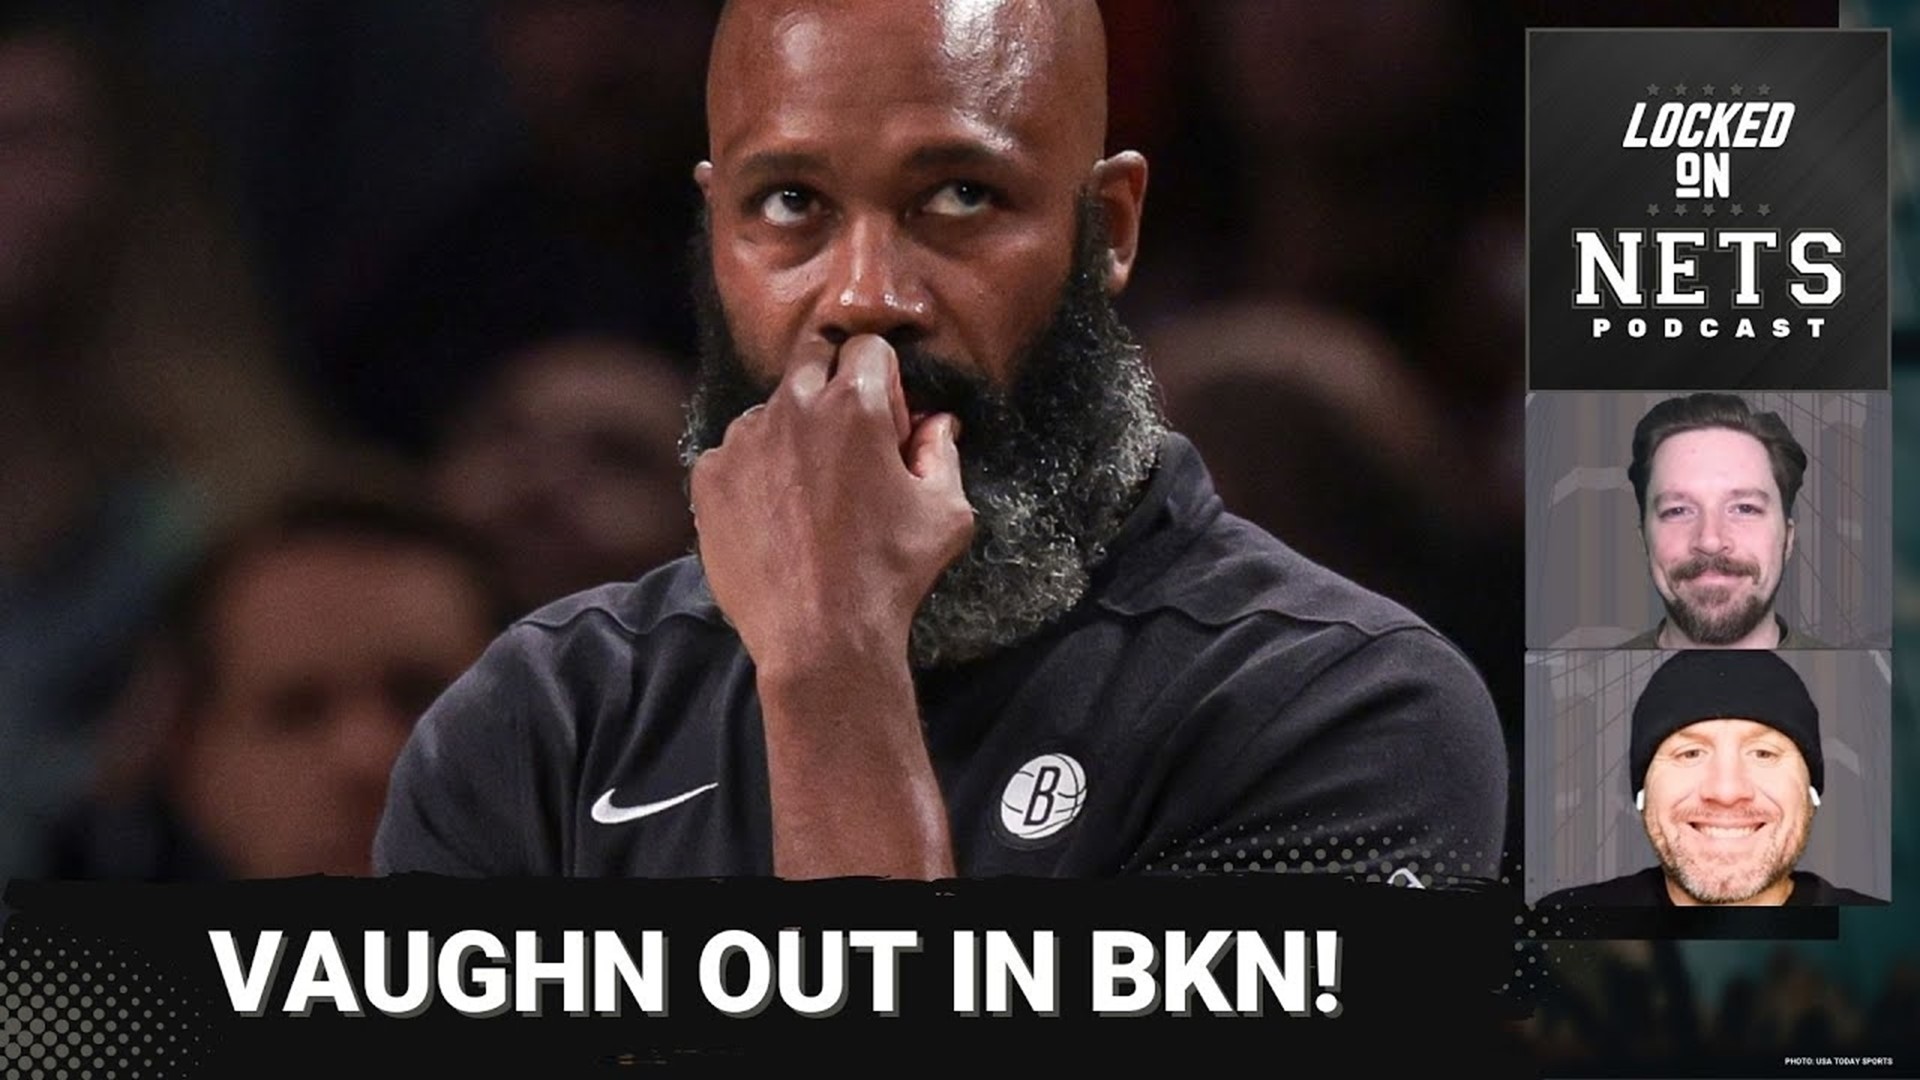 The guys discuss the firing of Jacque Vaughn, what role recent player comments had in the decision, and the short-erm outlook for the Nets.